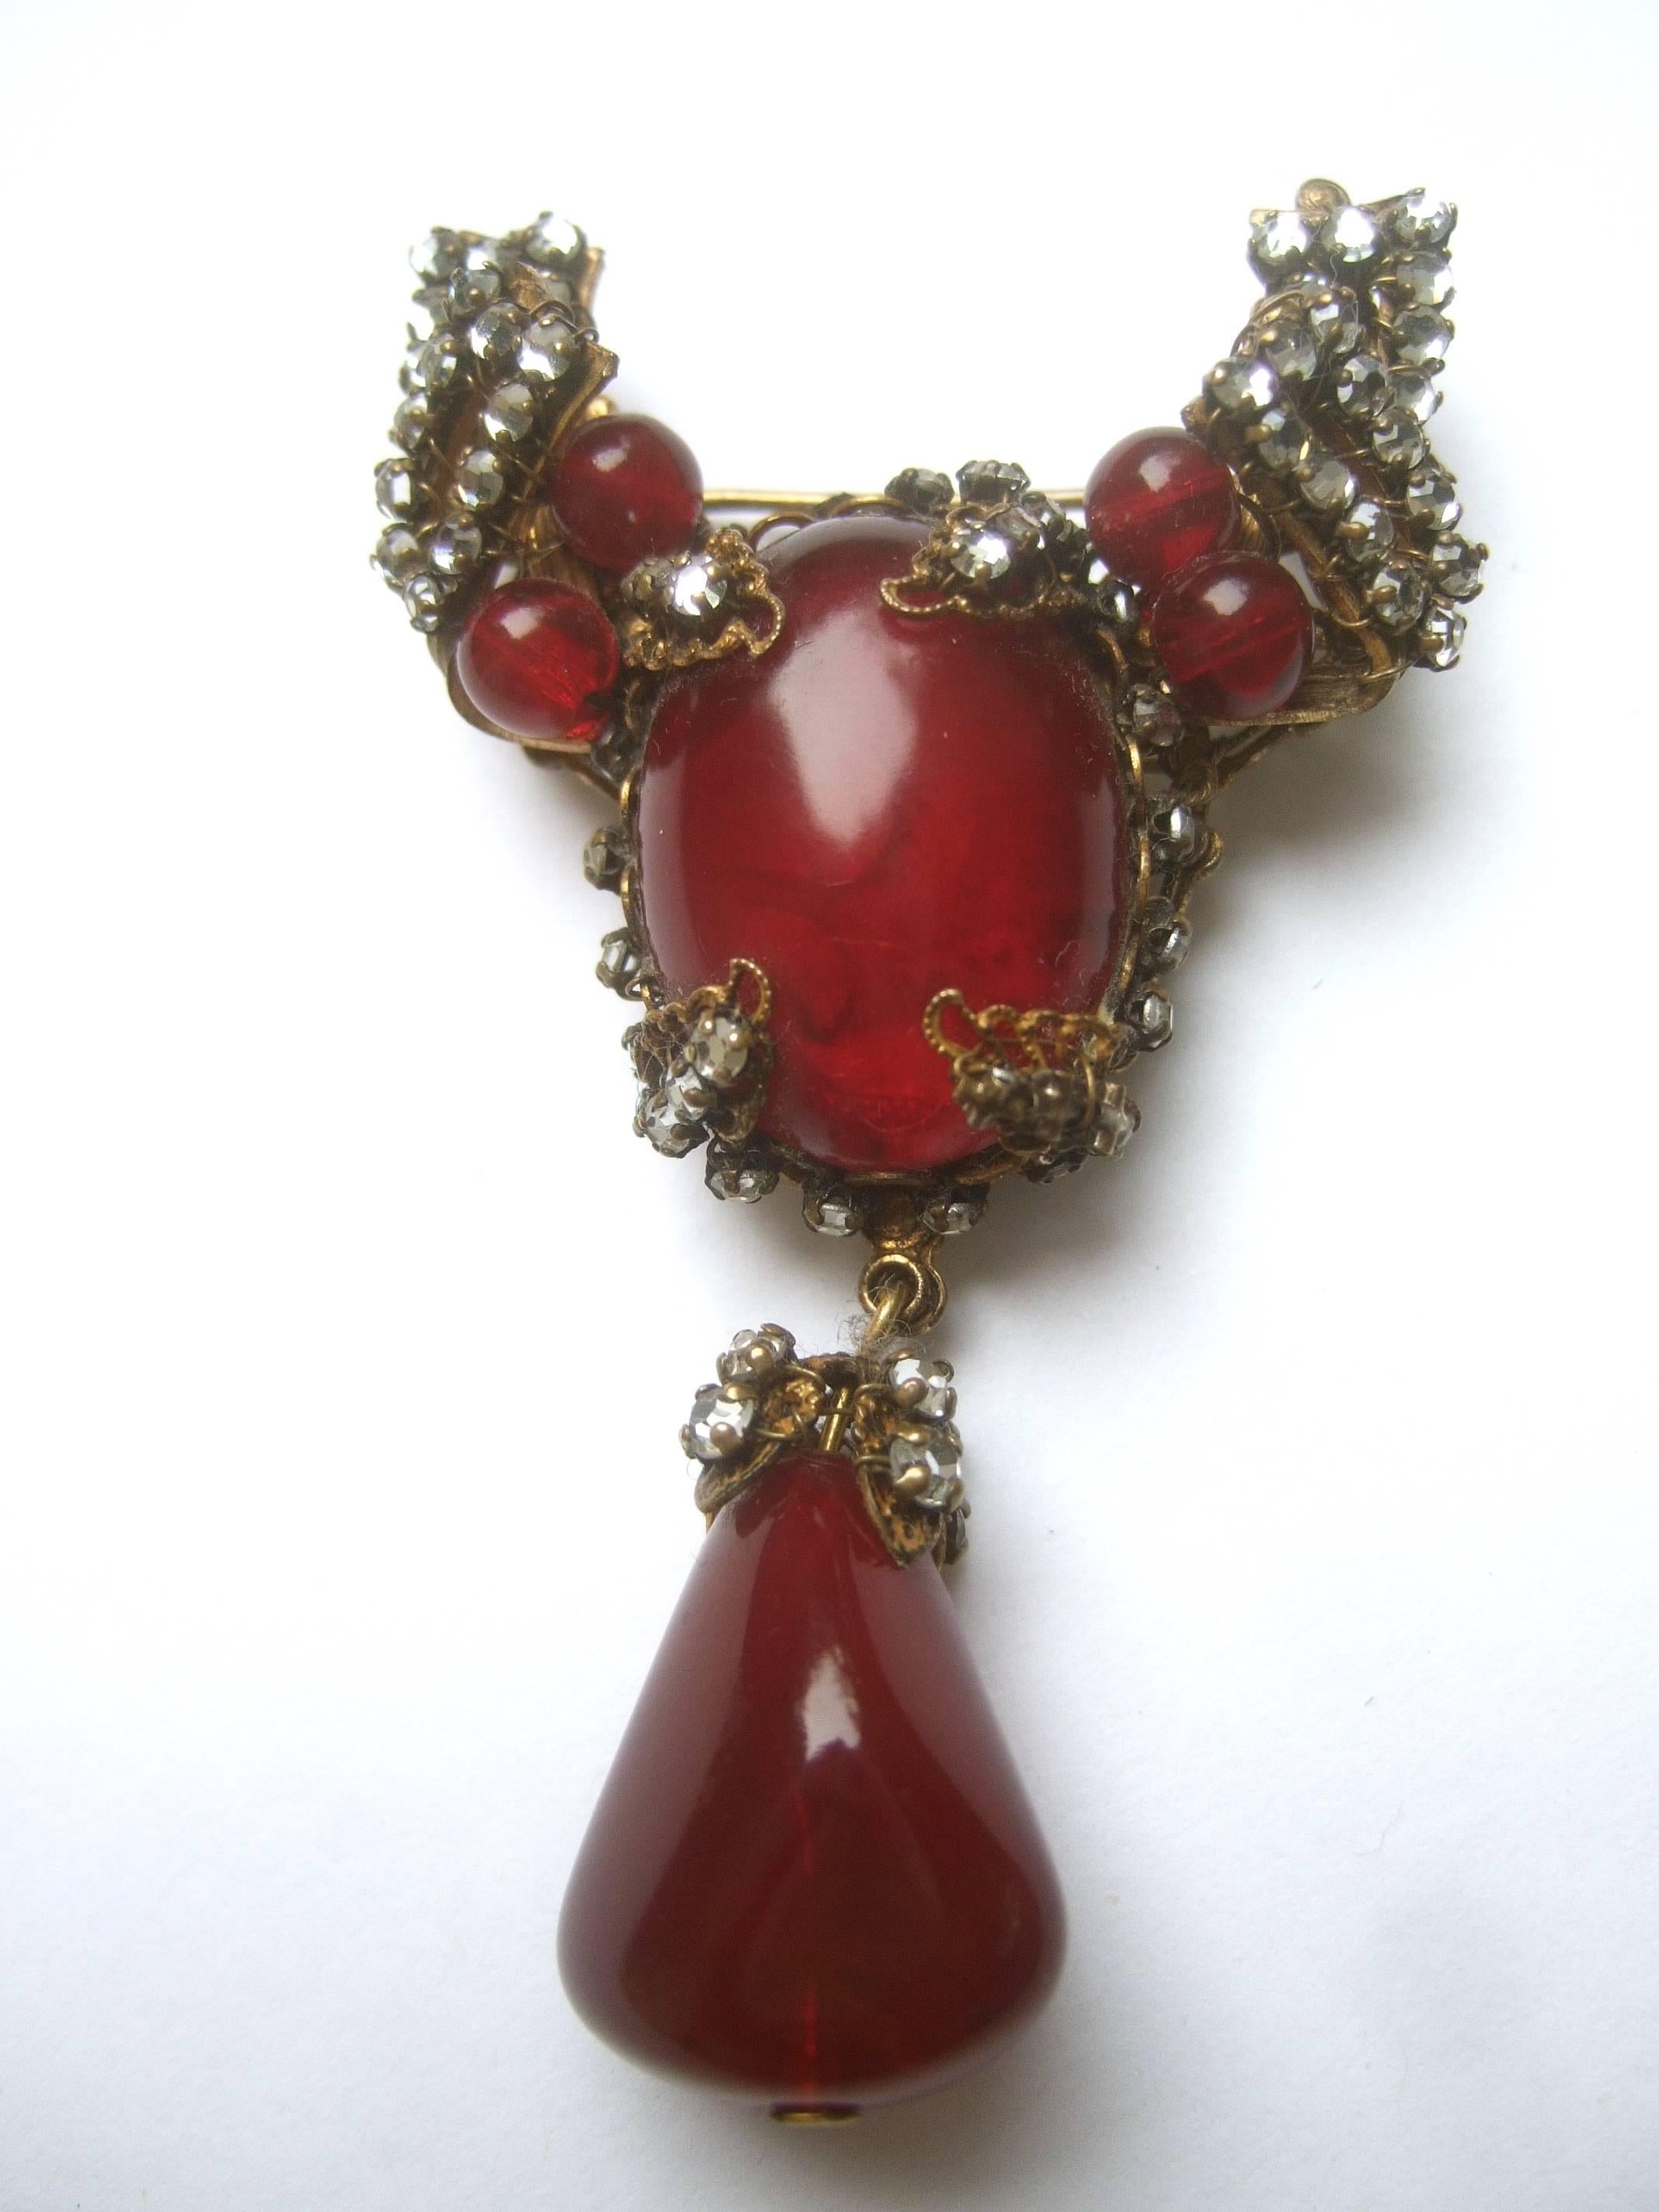 Women's Miriam Haskell Exquisite Scarlet Glass Tear Drop Brooch ca 1950s